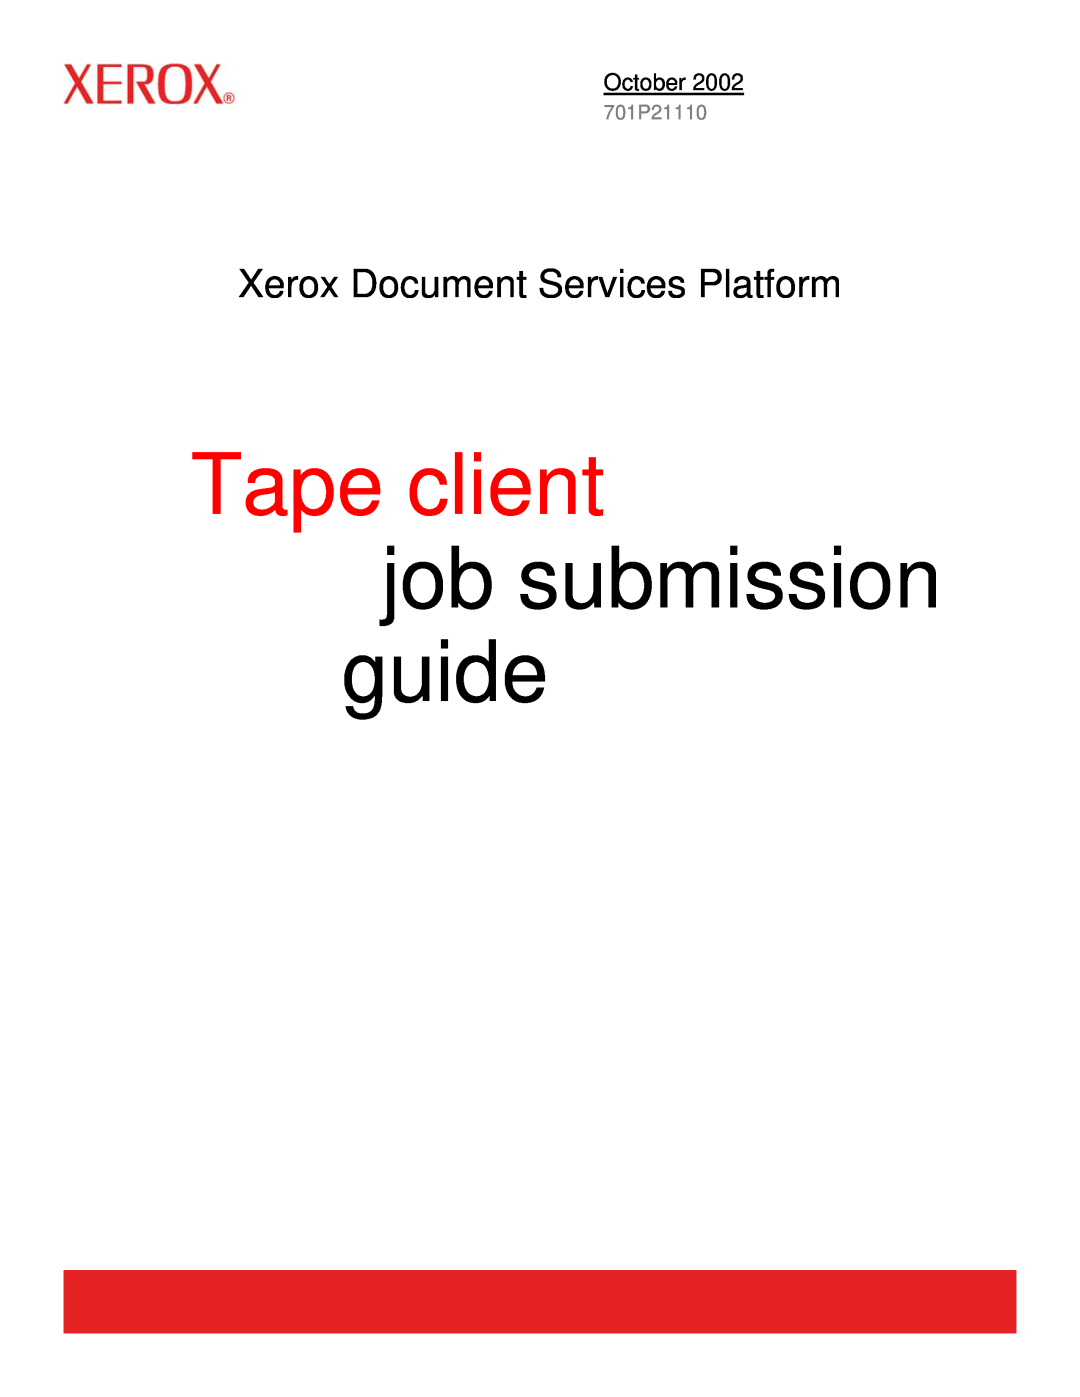 Xerox 701P21110 manual Tape client, job submission guide, Xerox Document Services Platform, October 